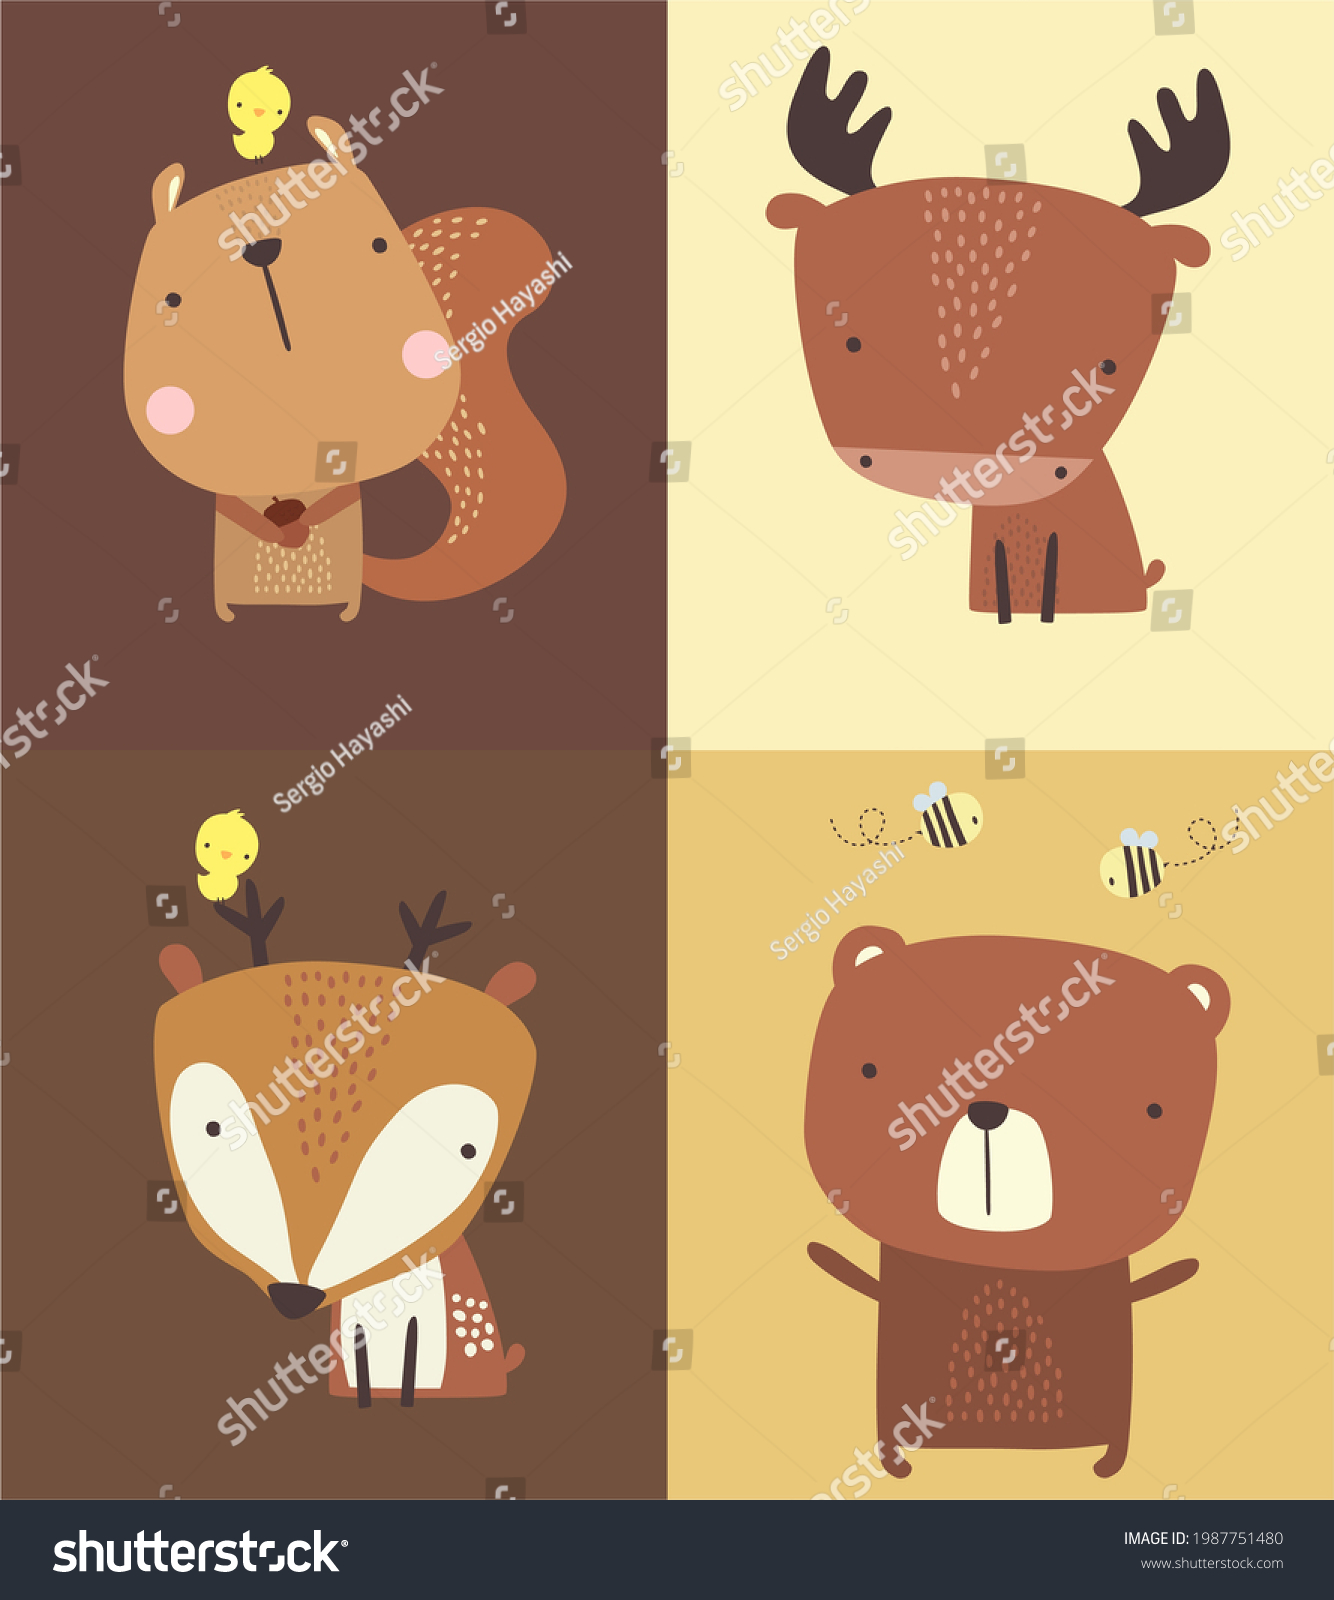 SVG of Set of cute forest animals illustration. bear, moose, squirrel and deer. Hand drawn style. can be used for nursery decoration, baby and kids wear, fashion print design svg